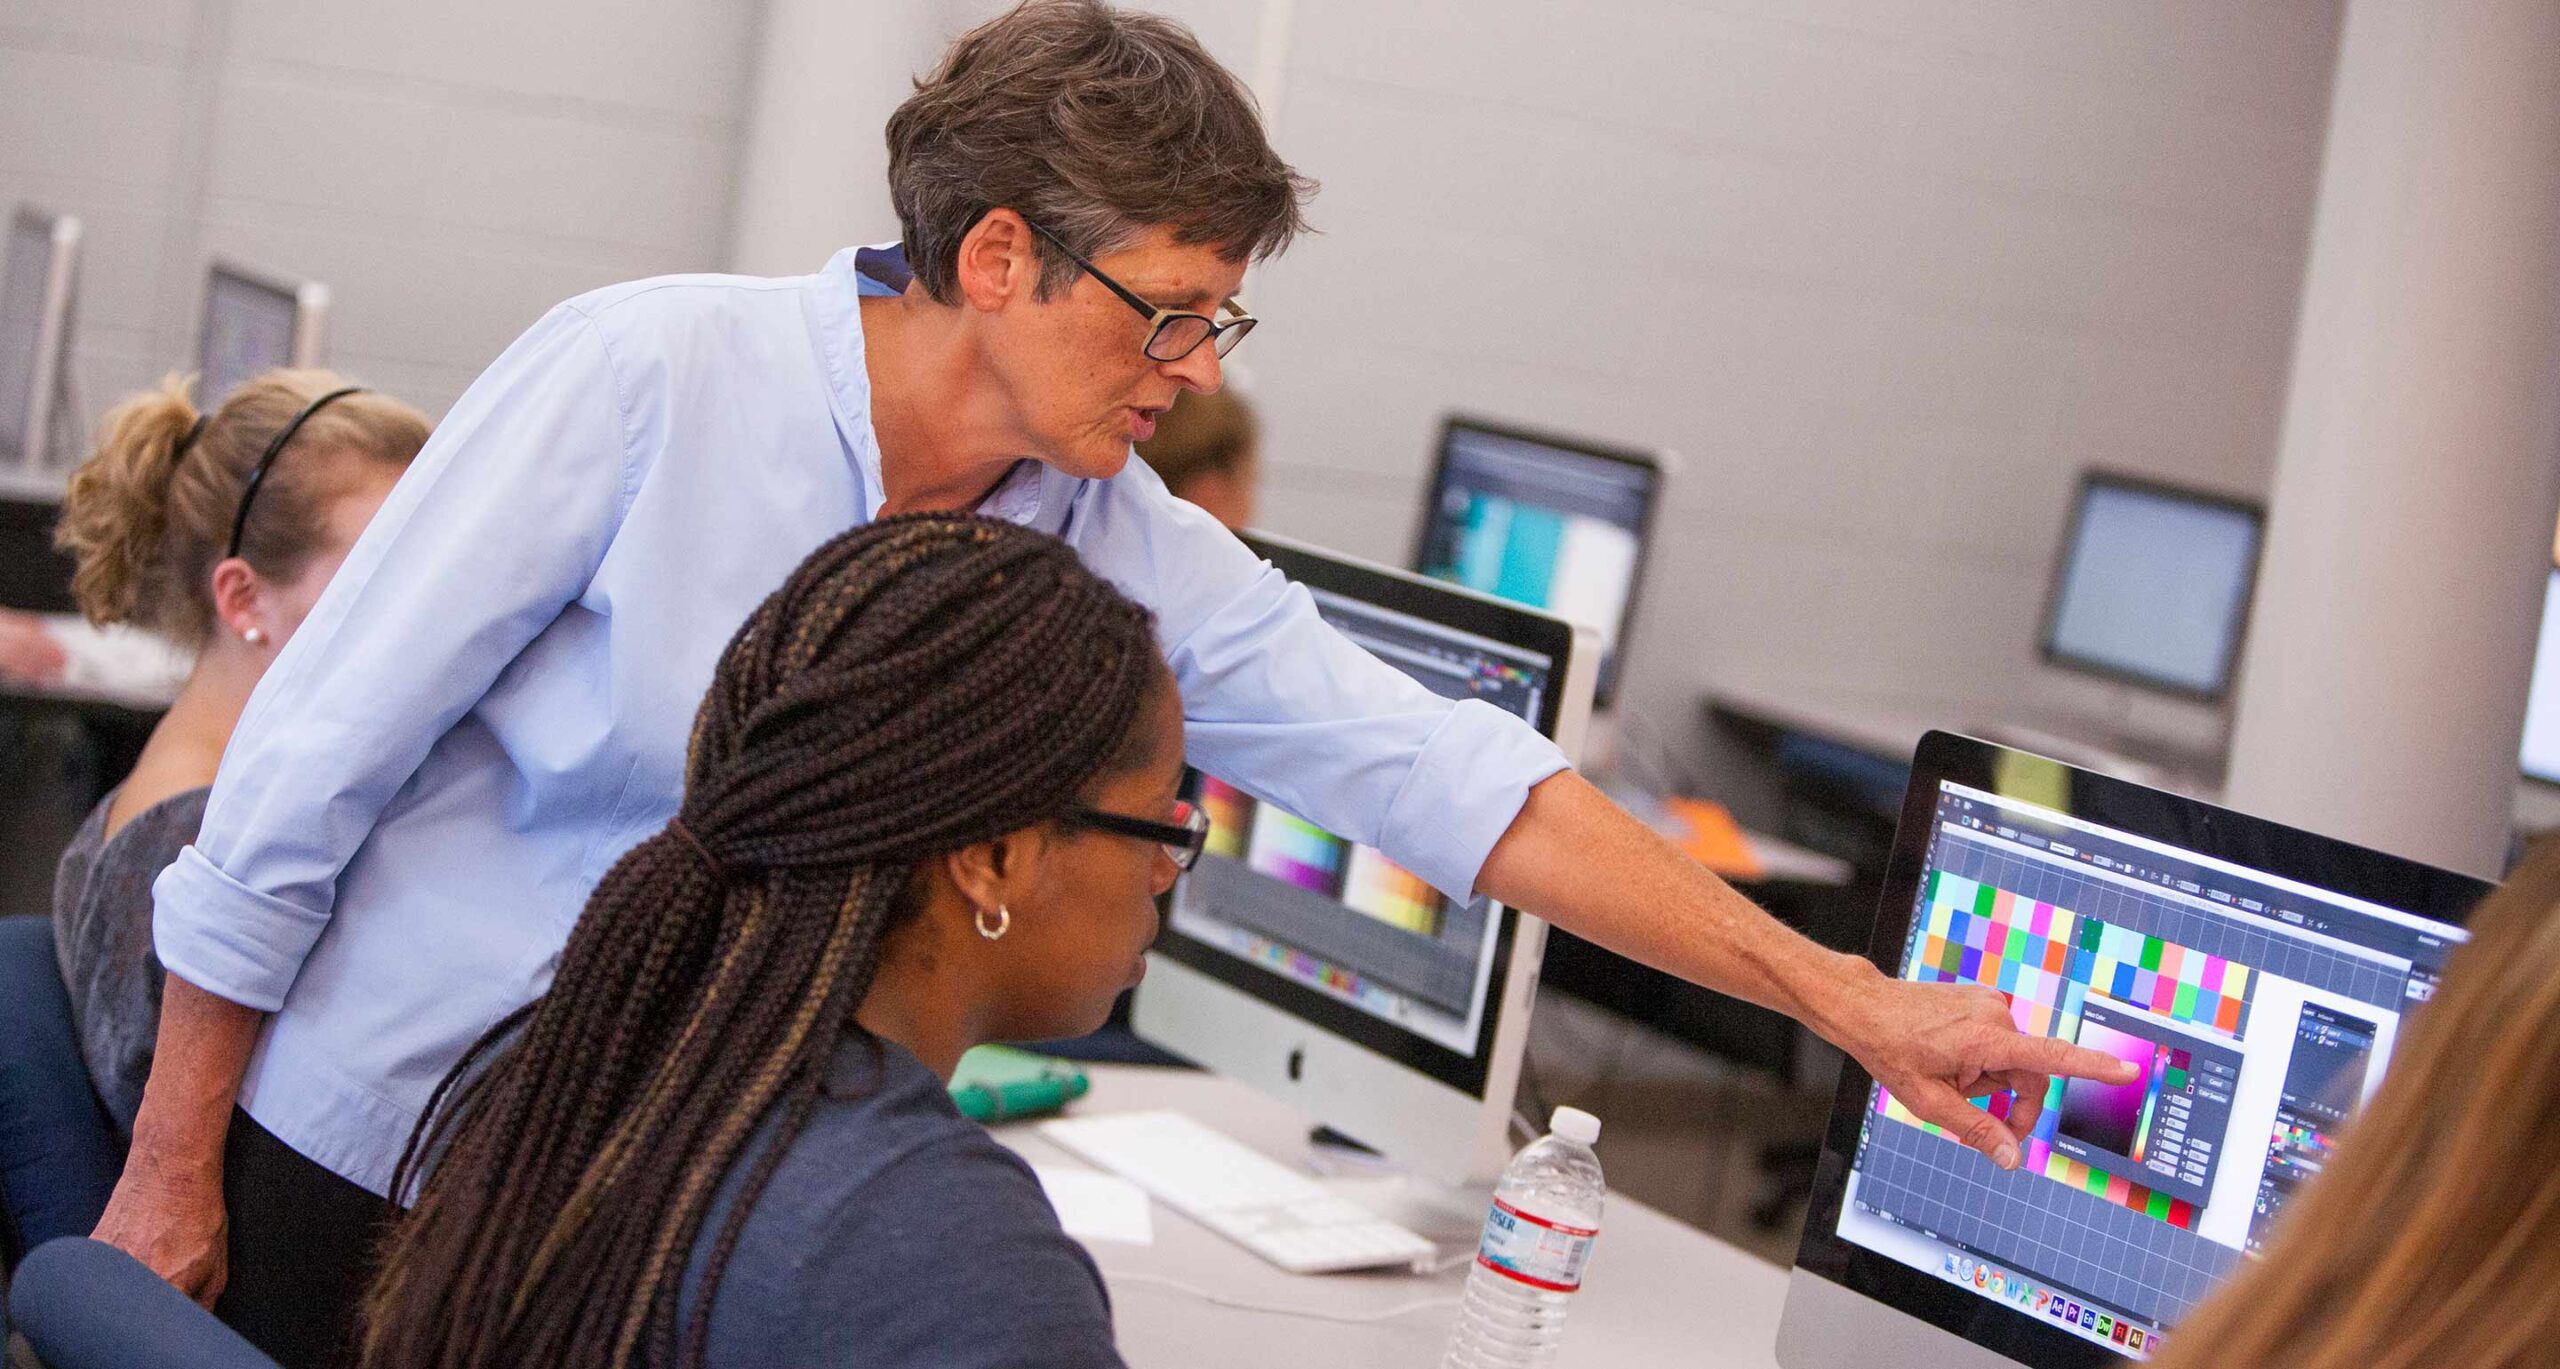 Graphic design faculty member at Assumption instructs a student on graphic design concepts